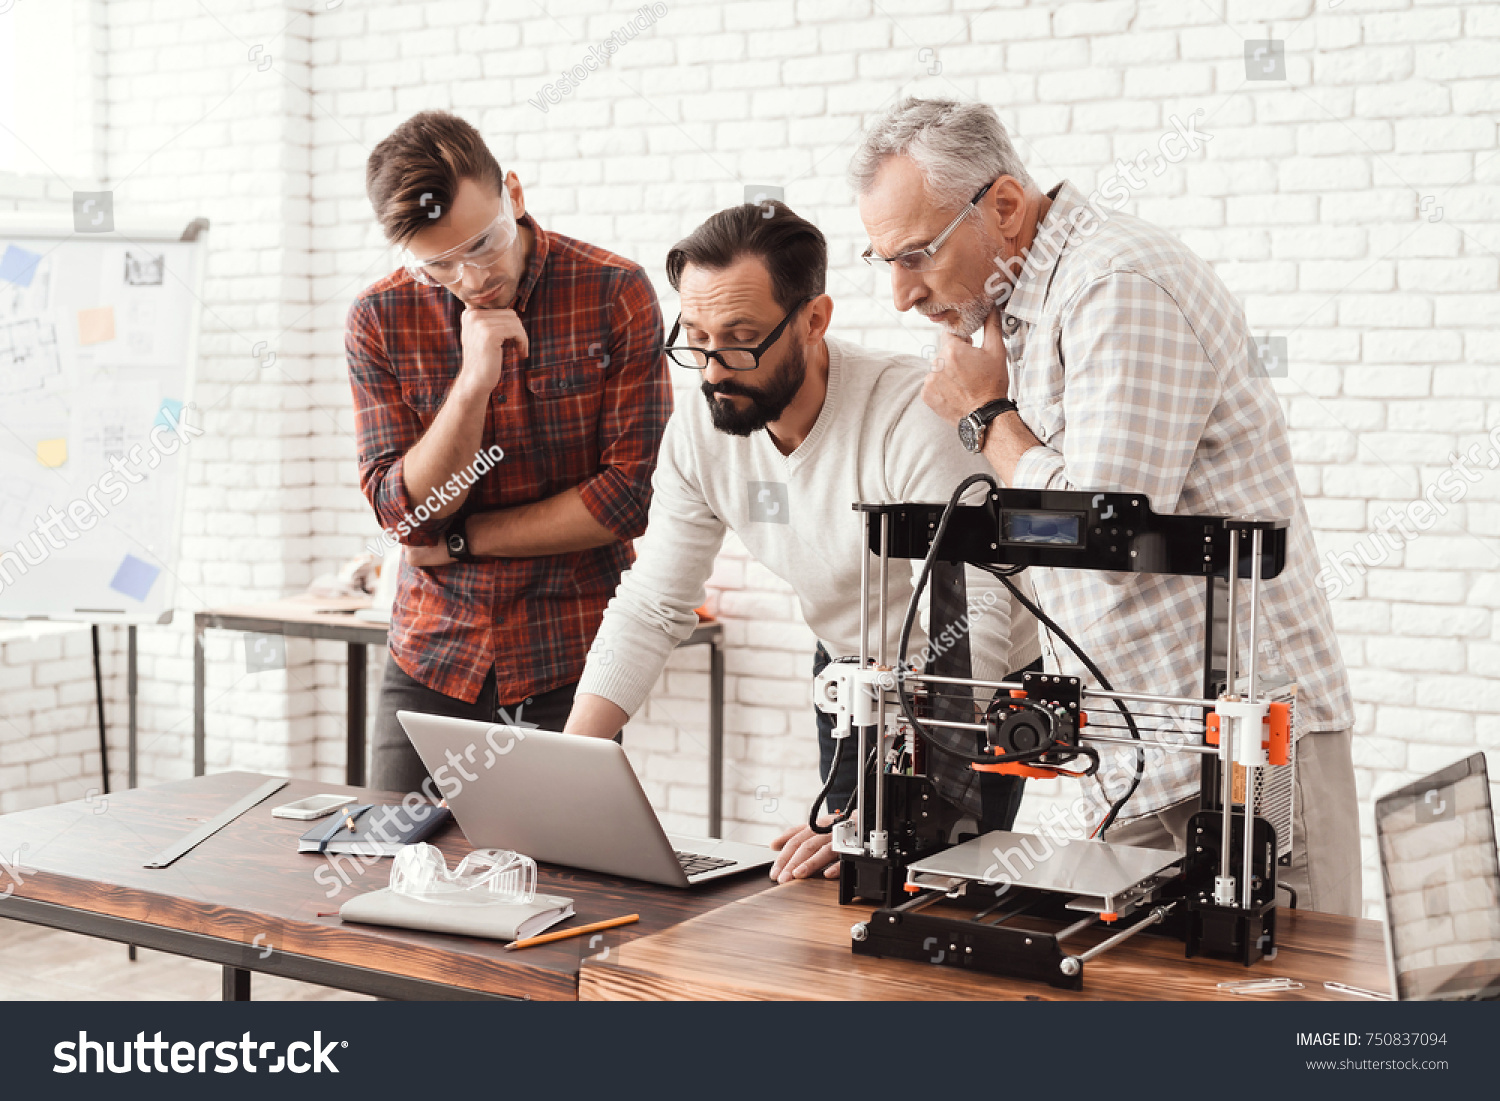 Three men are working on preparing a 3d printer for printing. One of them explains the rest of the subtlety to the print. A young and elderly man is looking at the laptop monitor screen. #750837094